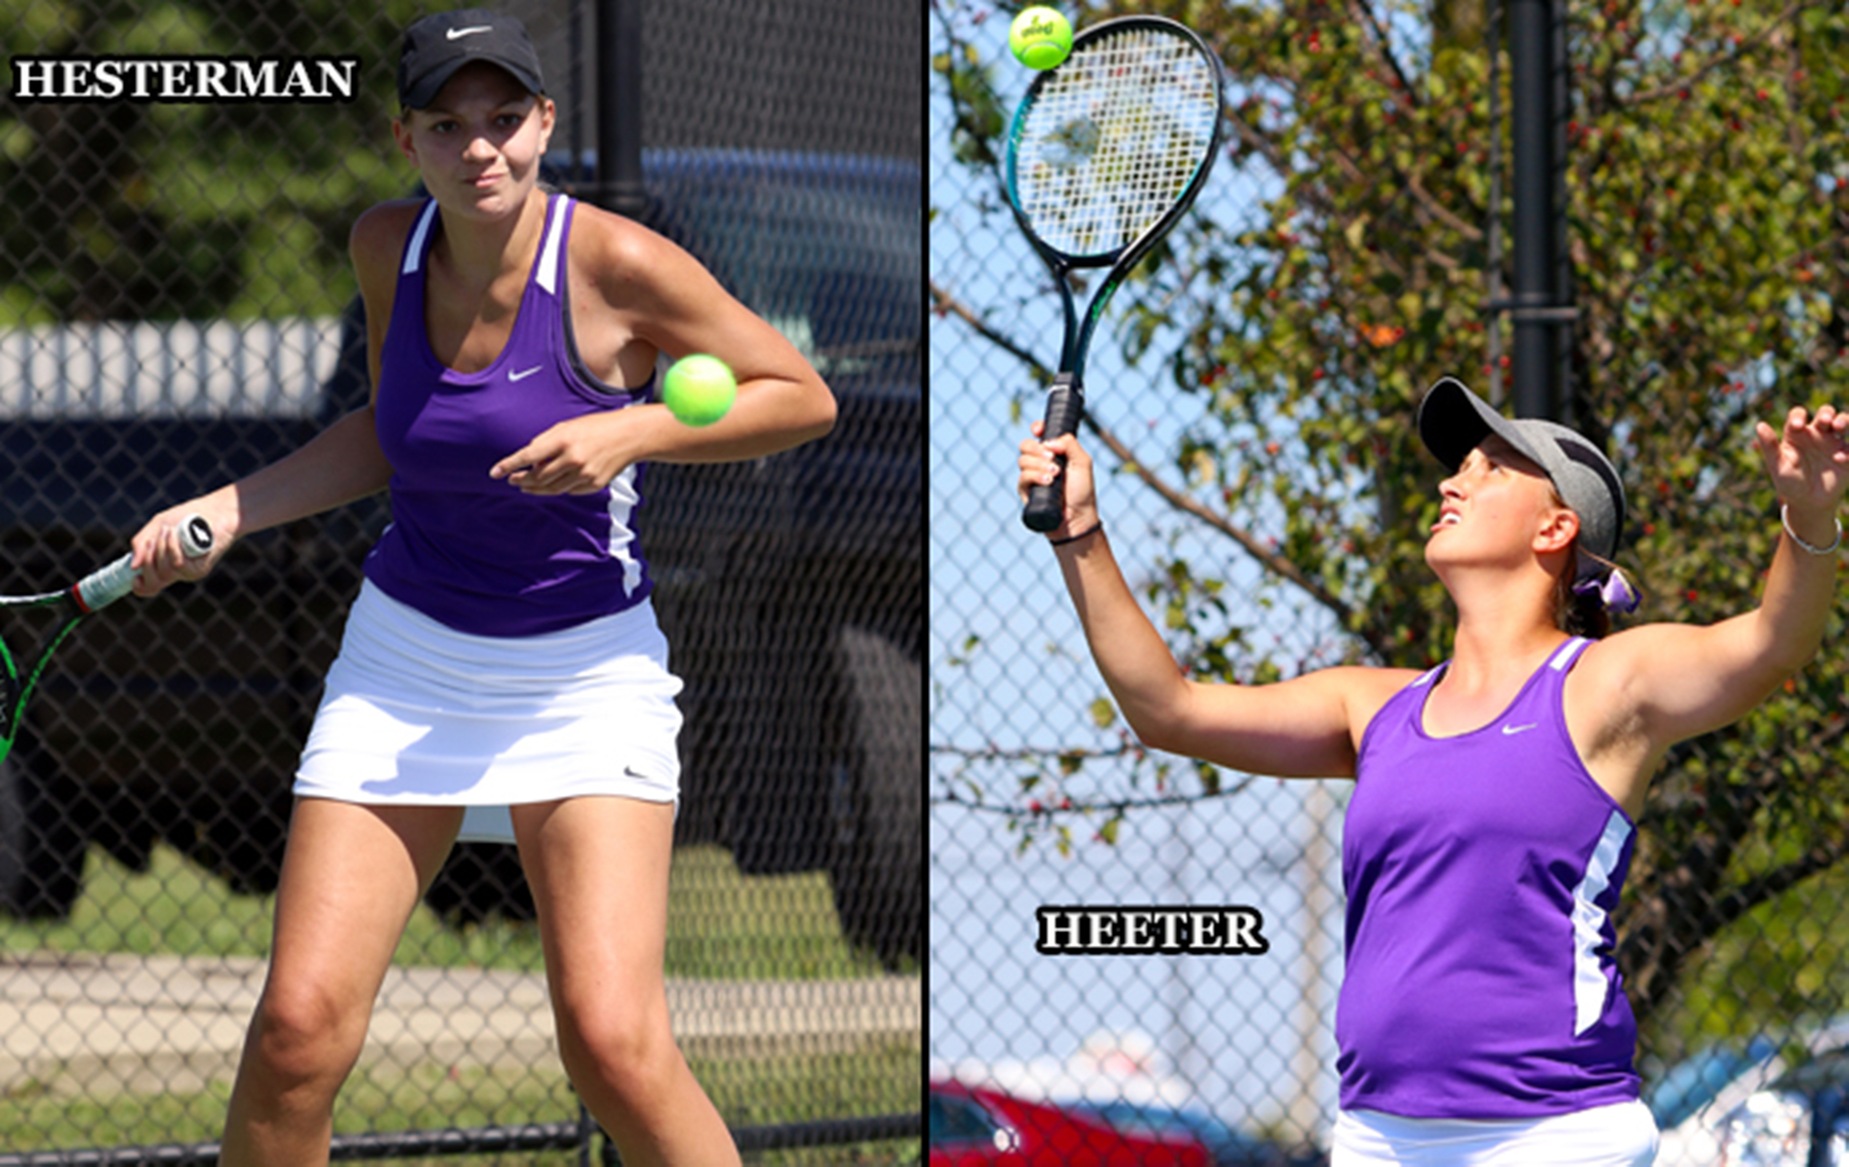 Hesterman and Heeter Earn All-HCAC Honors